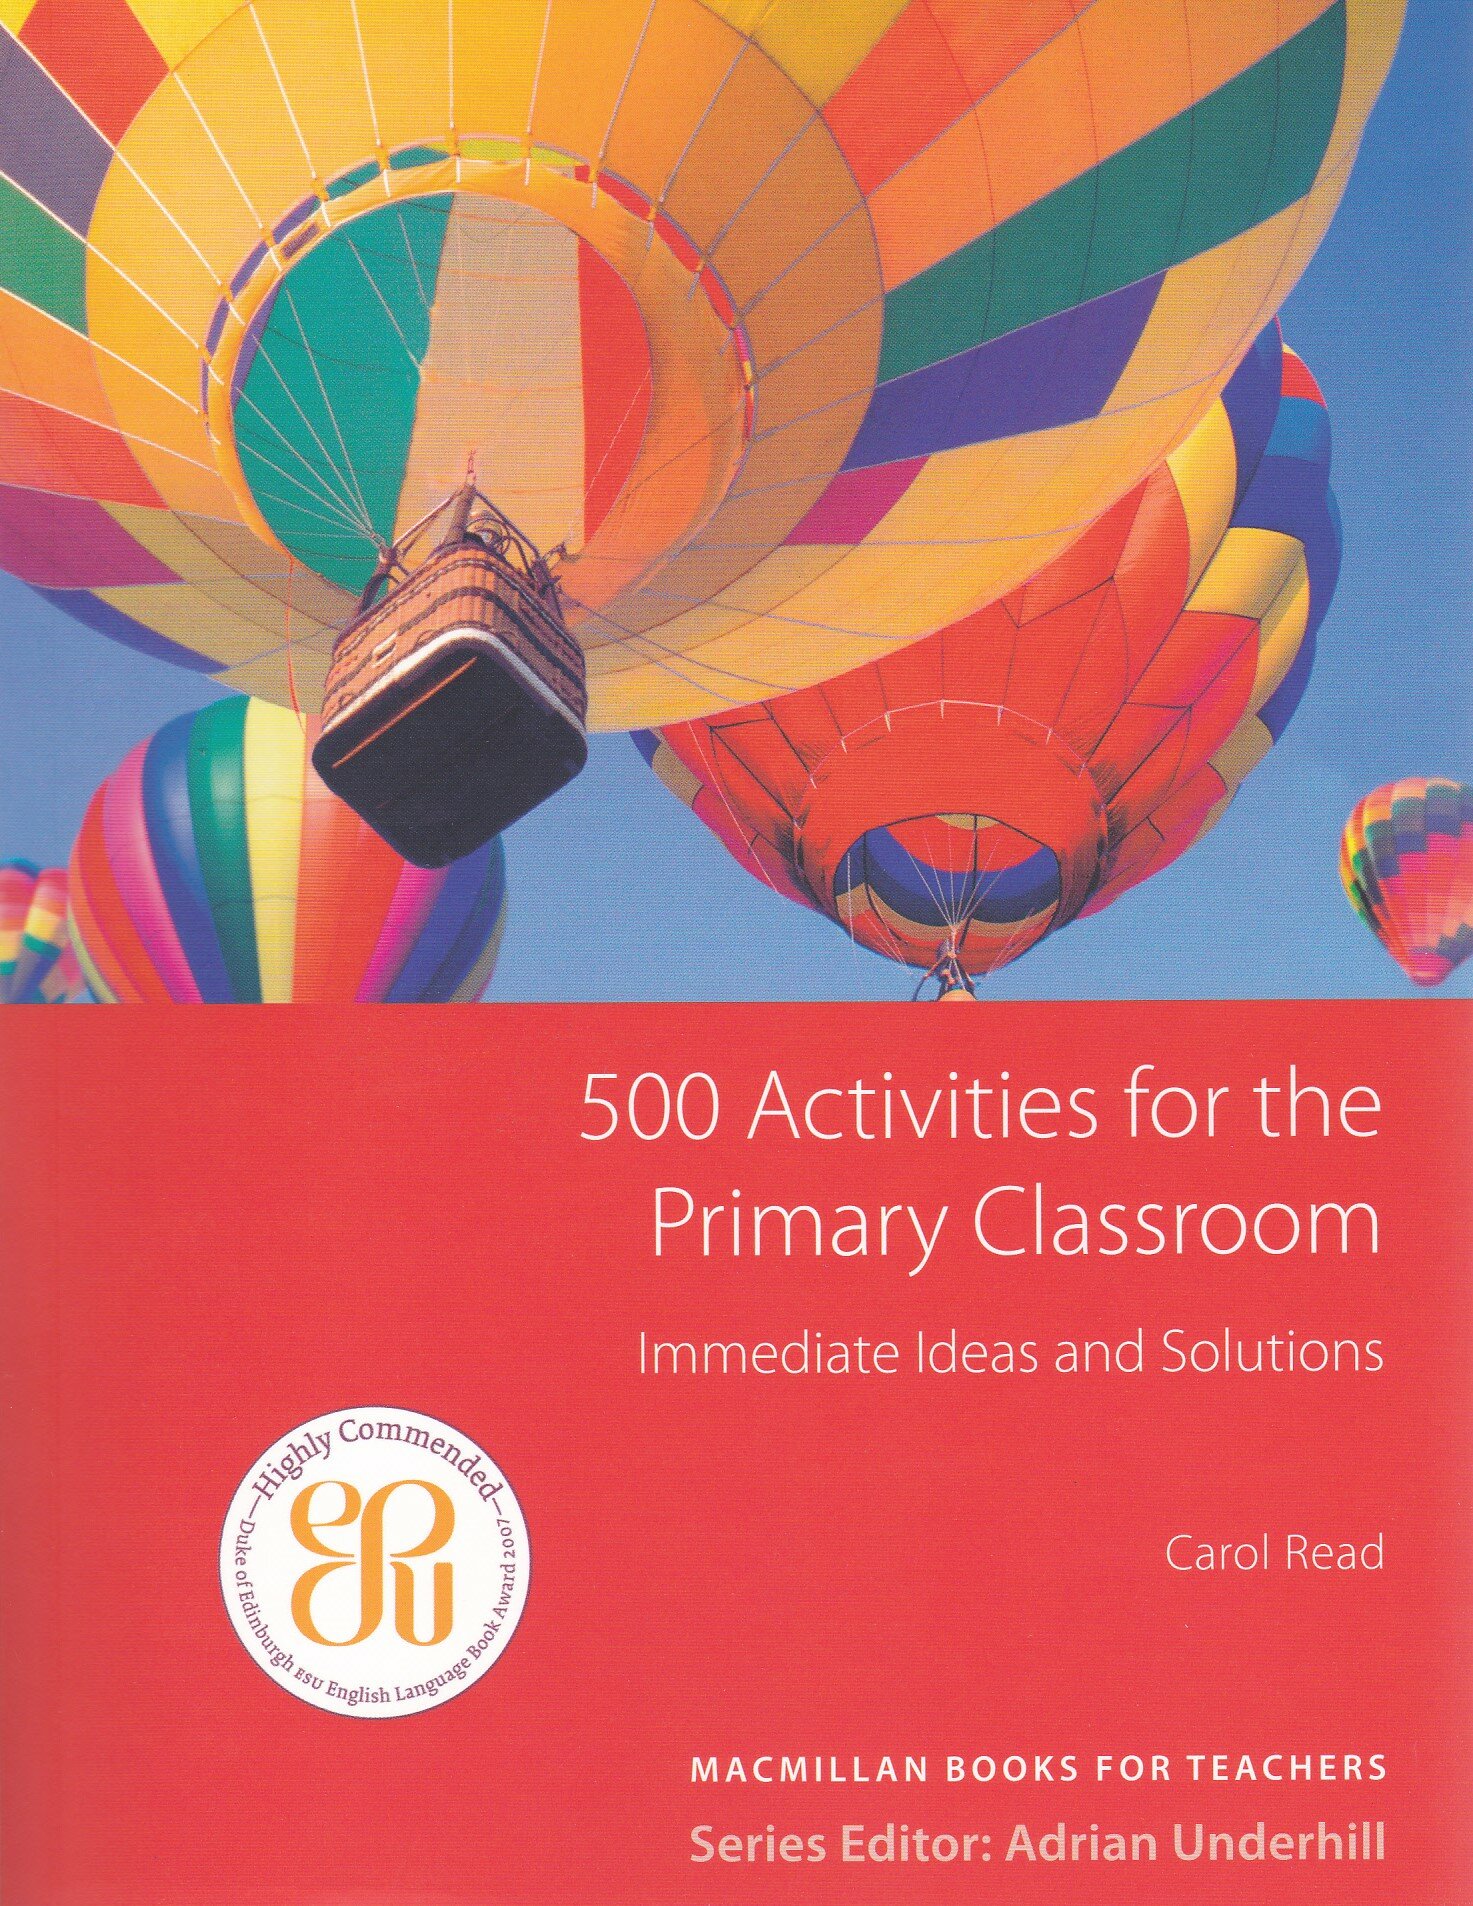 500 Activities for the Primary Classroom: Immediate Ideas and Solutions